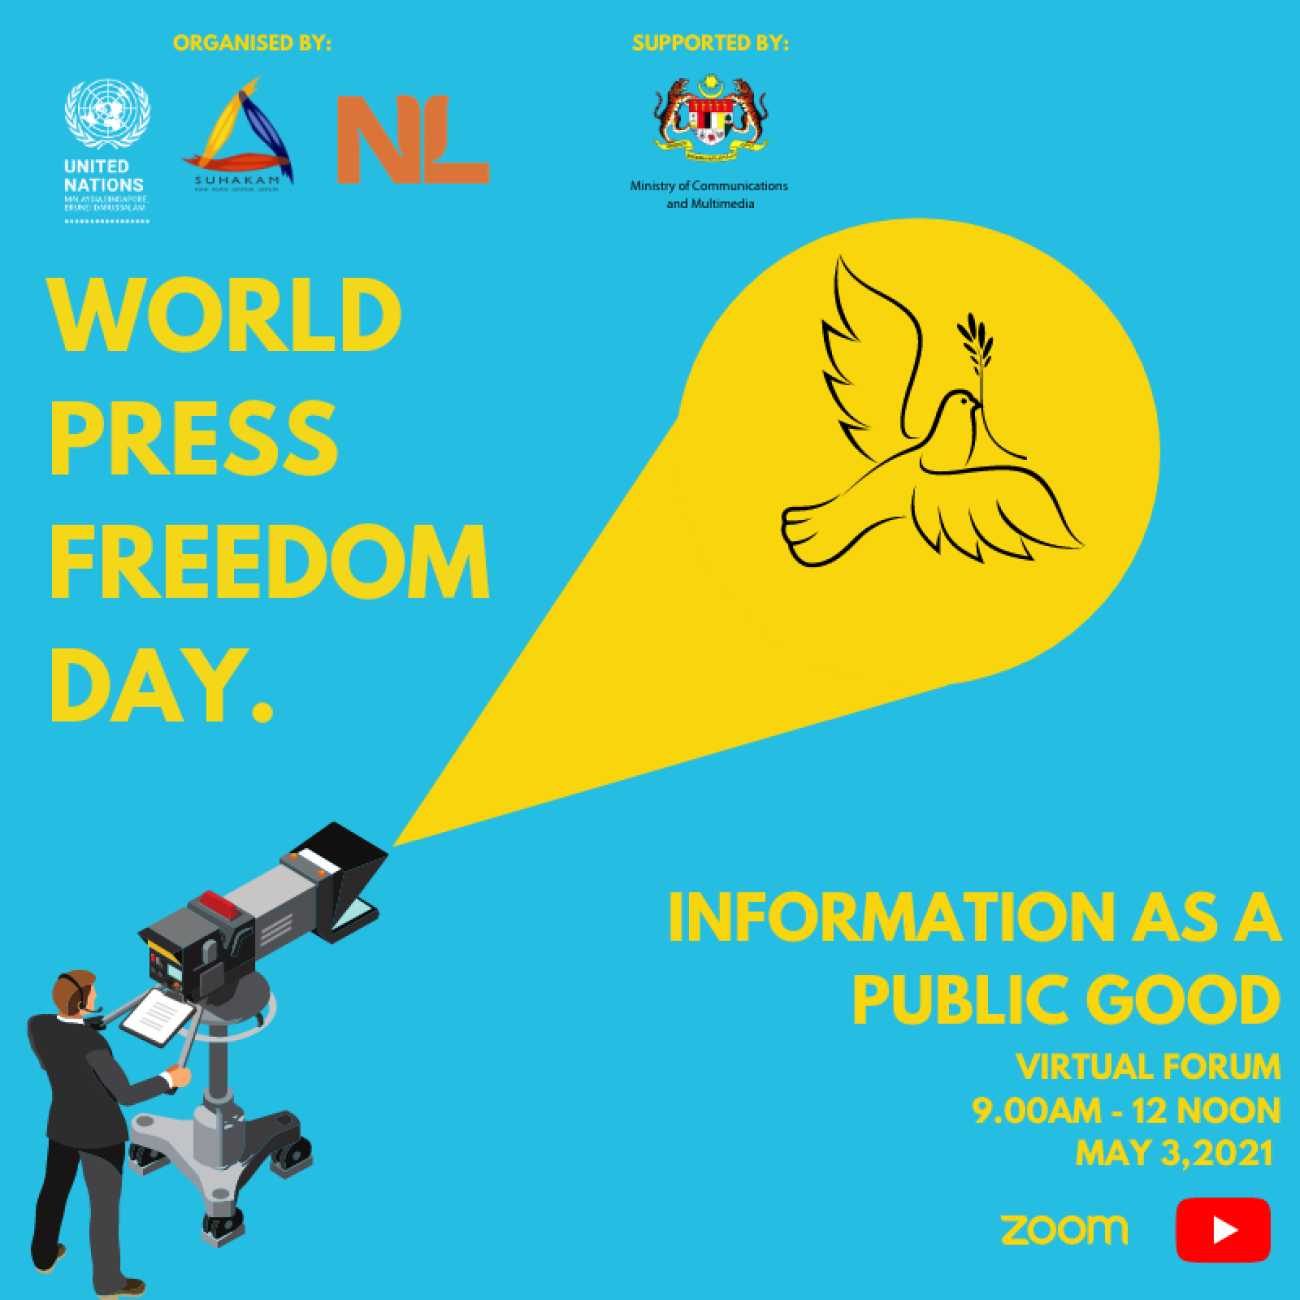 World Press Freedom Day Virtual Forum United Nations in Malaysia